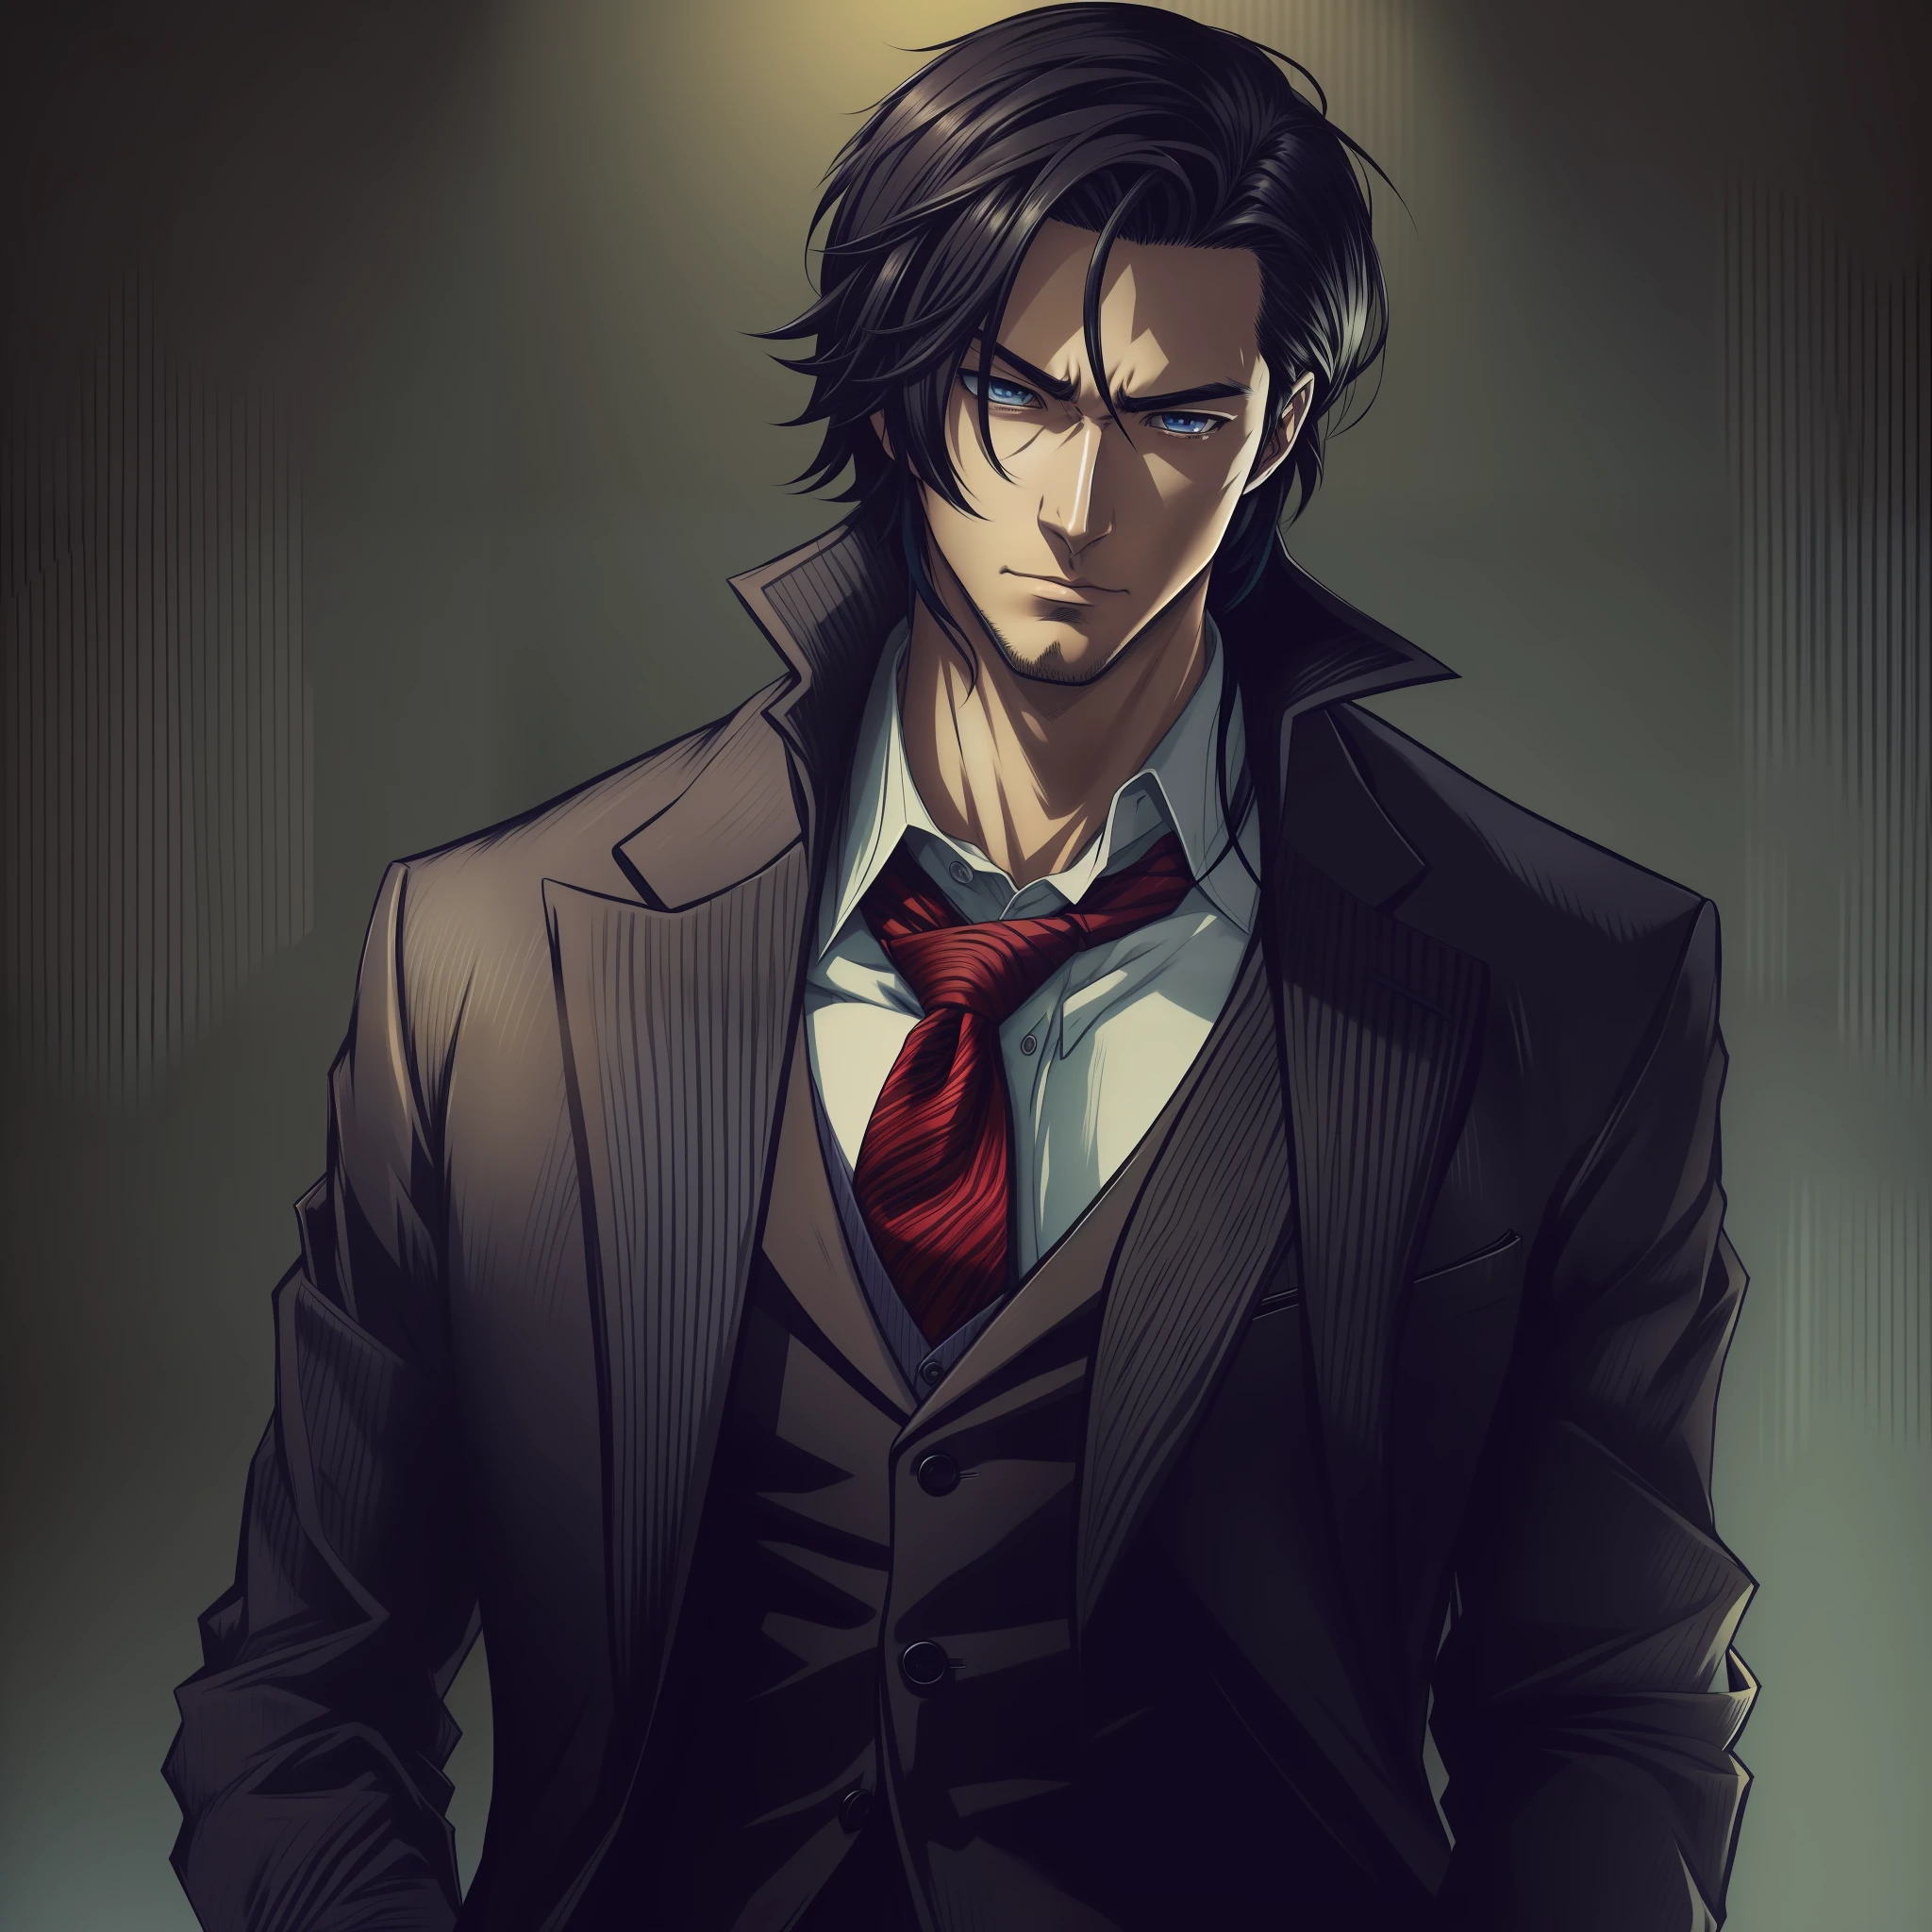 There was a man in a suit and tie standing in a dark room, handsome guy in demon killer art, Anime handsome man, Anime portrait of a handsome man, Handsome anime pose, inspired by Yamagata Hiro, Tall anime guy with blue eyes, highly detailed exquisite fanart, kentaro miura art style, made with anime painter studio, shigenori soejima illustration